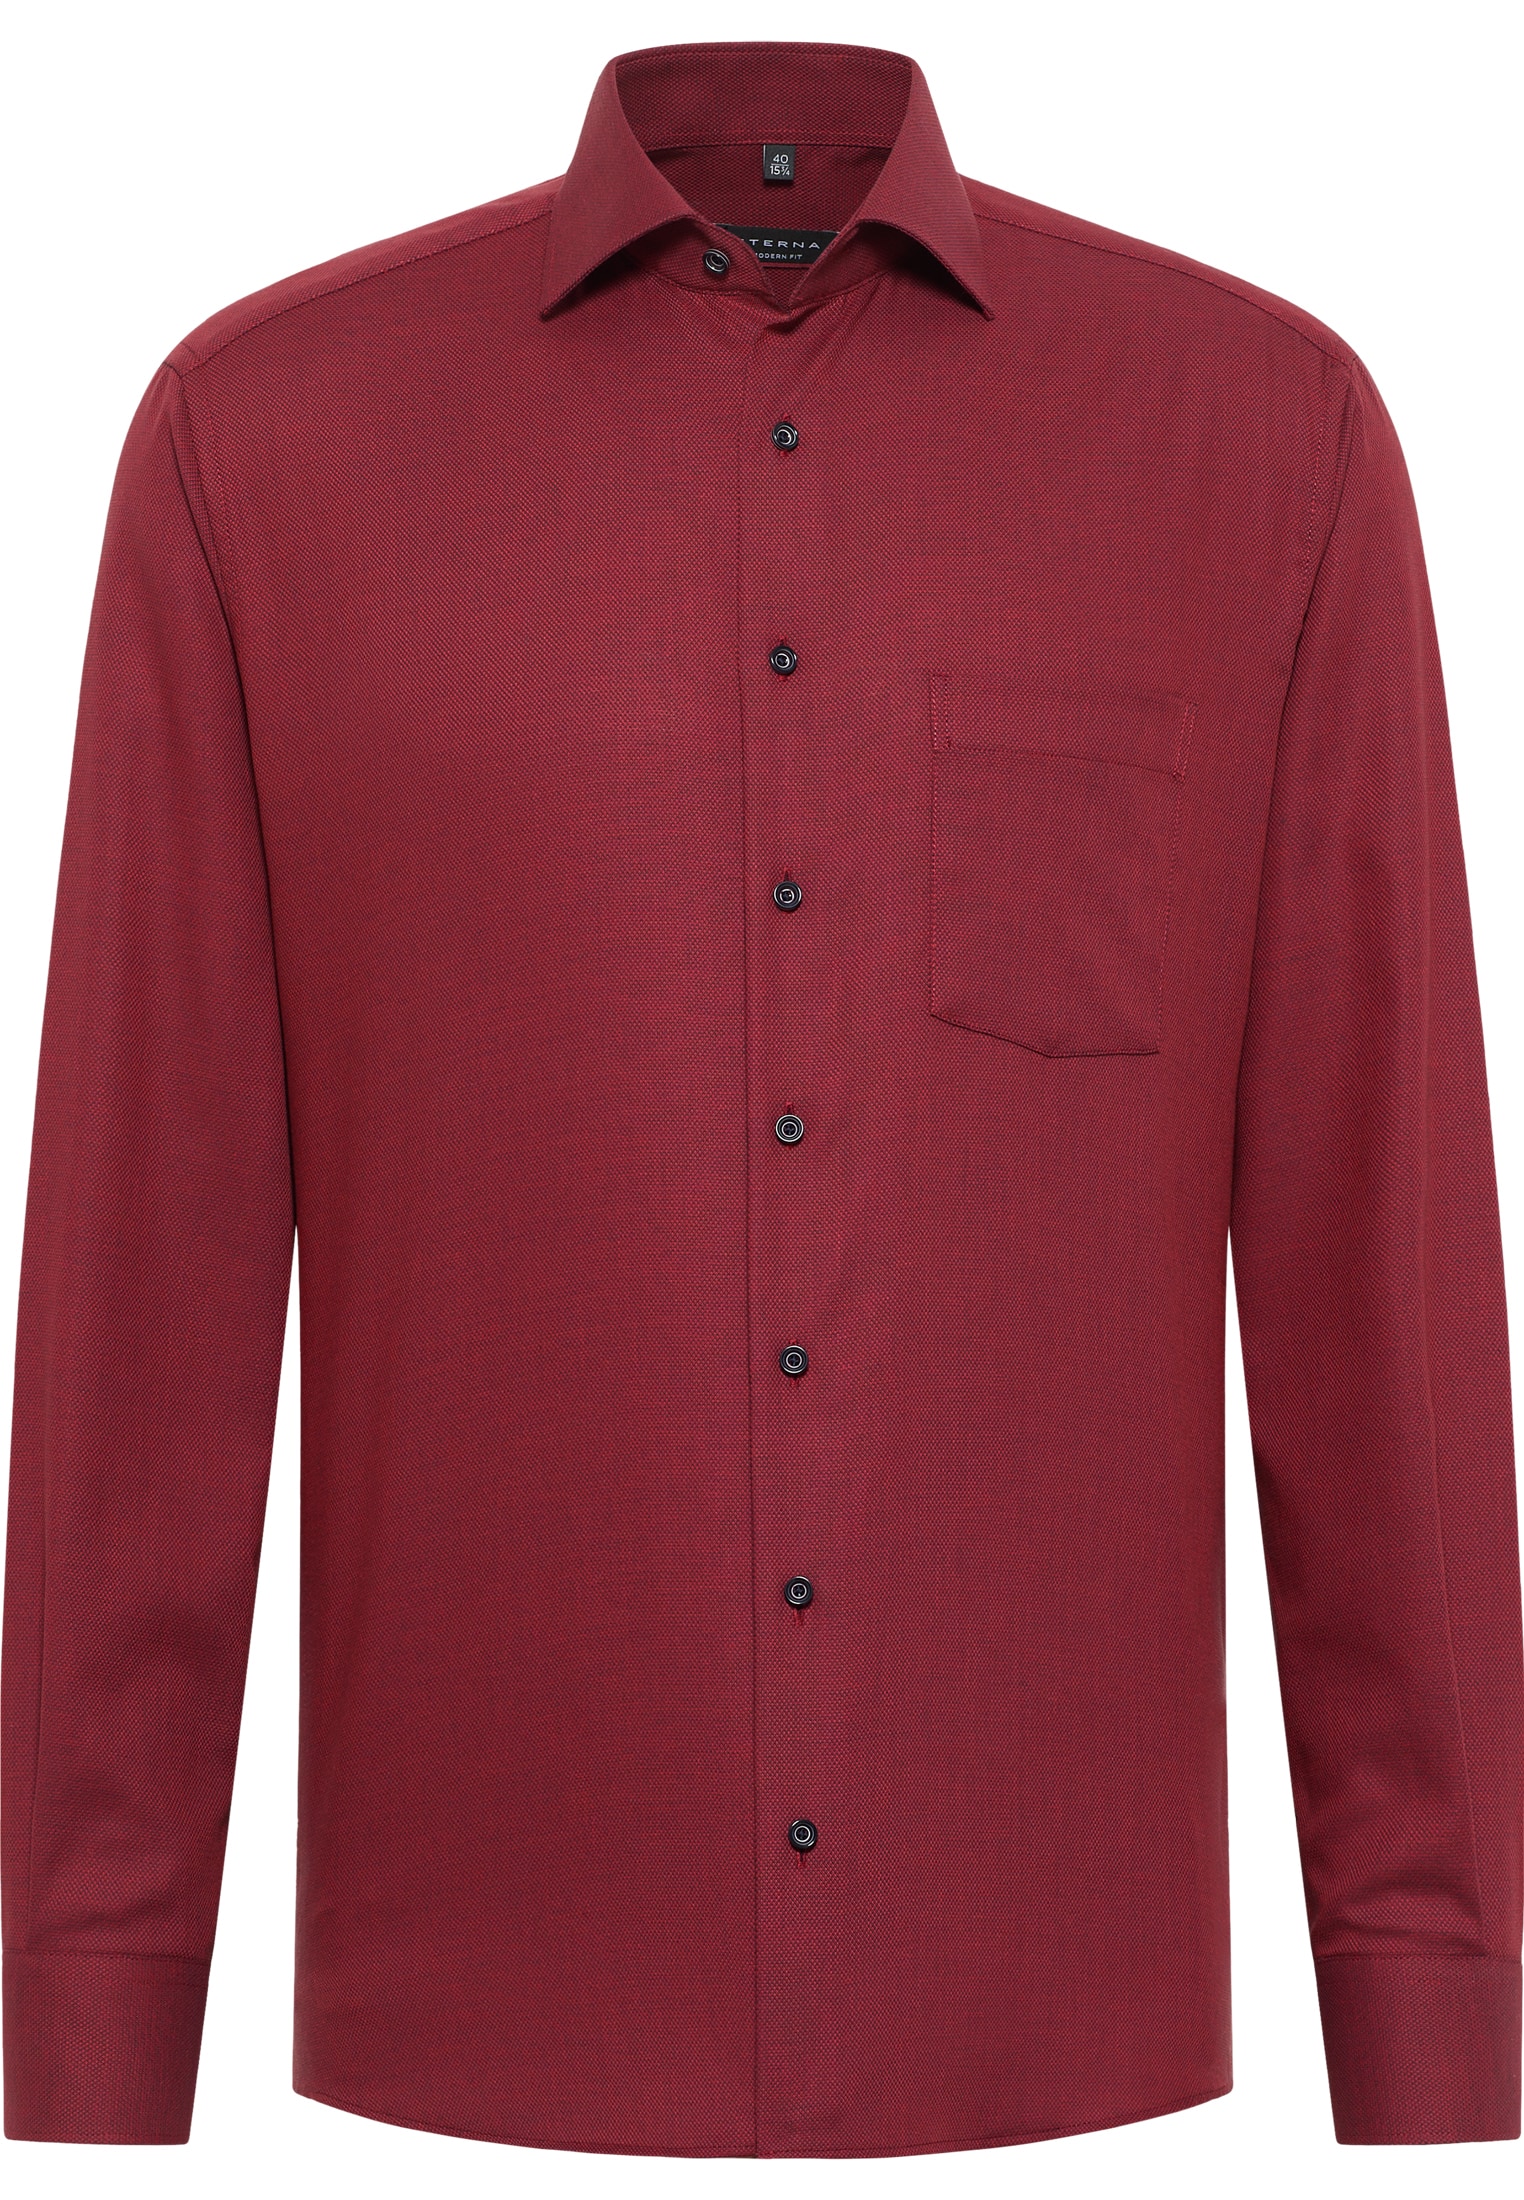 MODERN FIT Shirt in rusty red structured